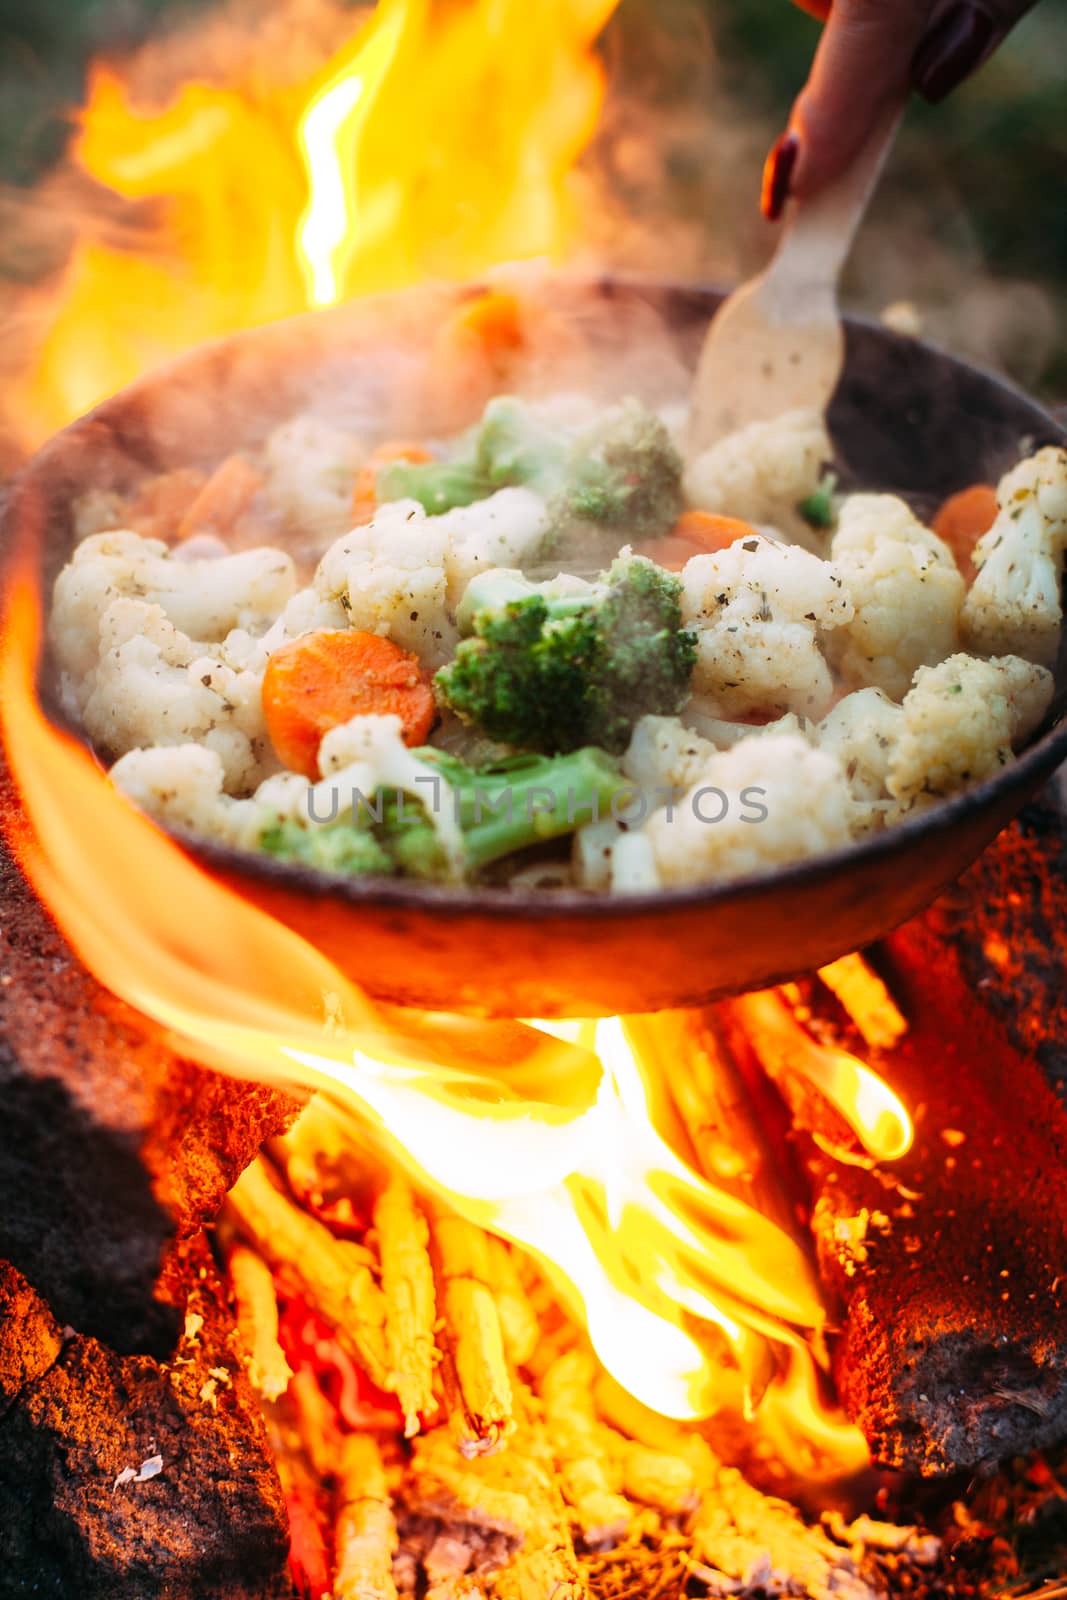 Cauliflower, broccoli and carrot in a pan. Cooking on an open fire. Outdoor food. Grilled vegetables. Food on a camping trip. Hand with a spatula